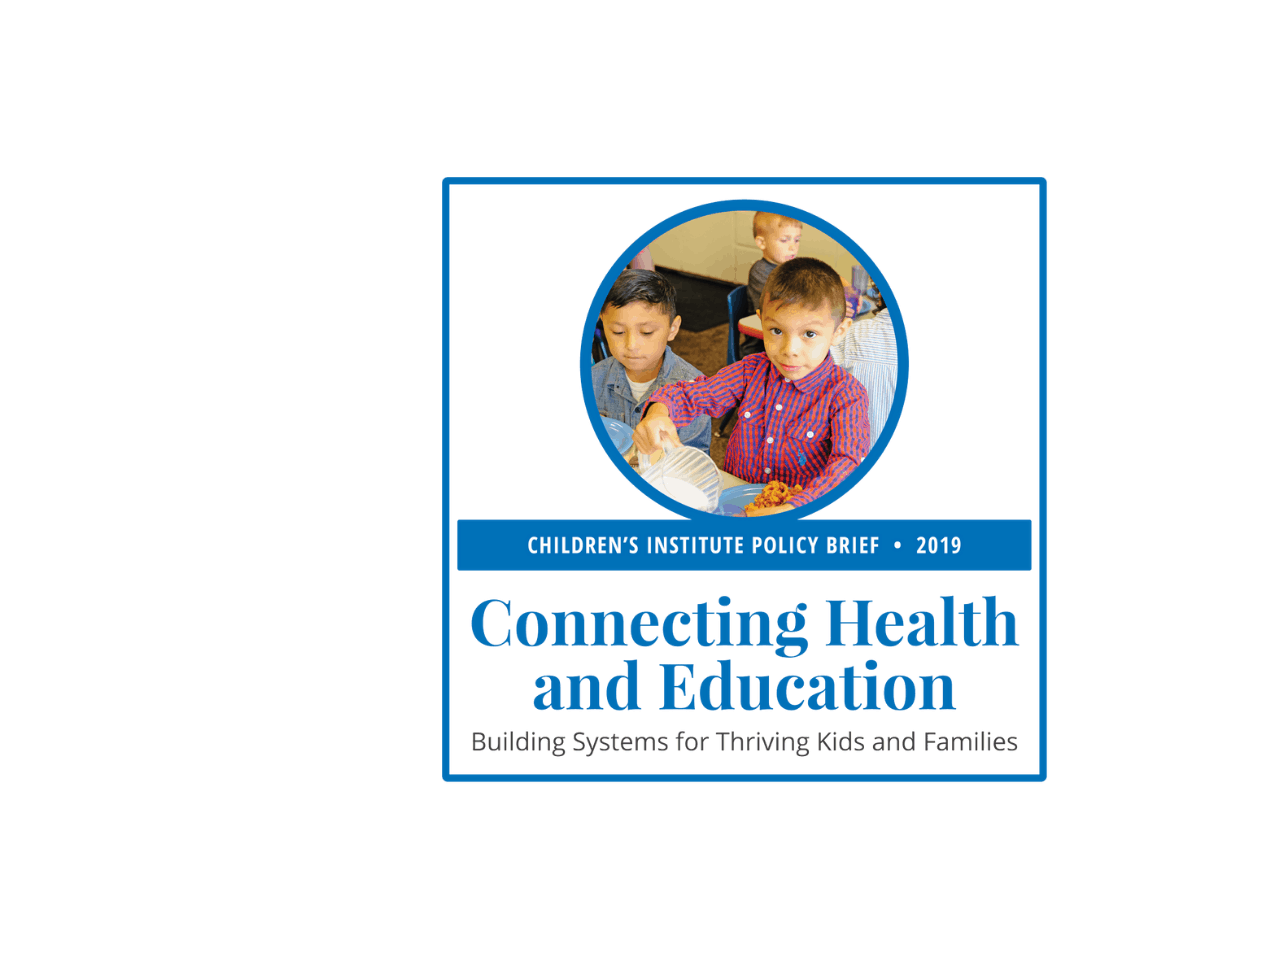 Connecting Health and Education